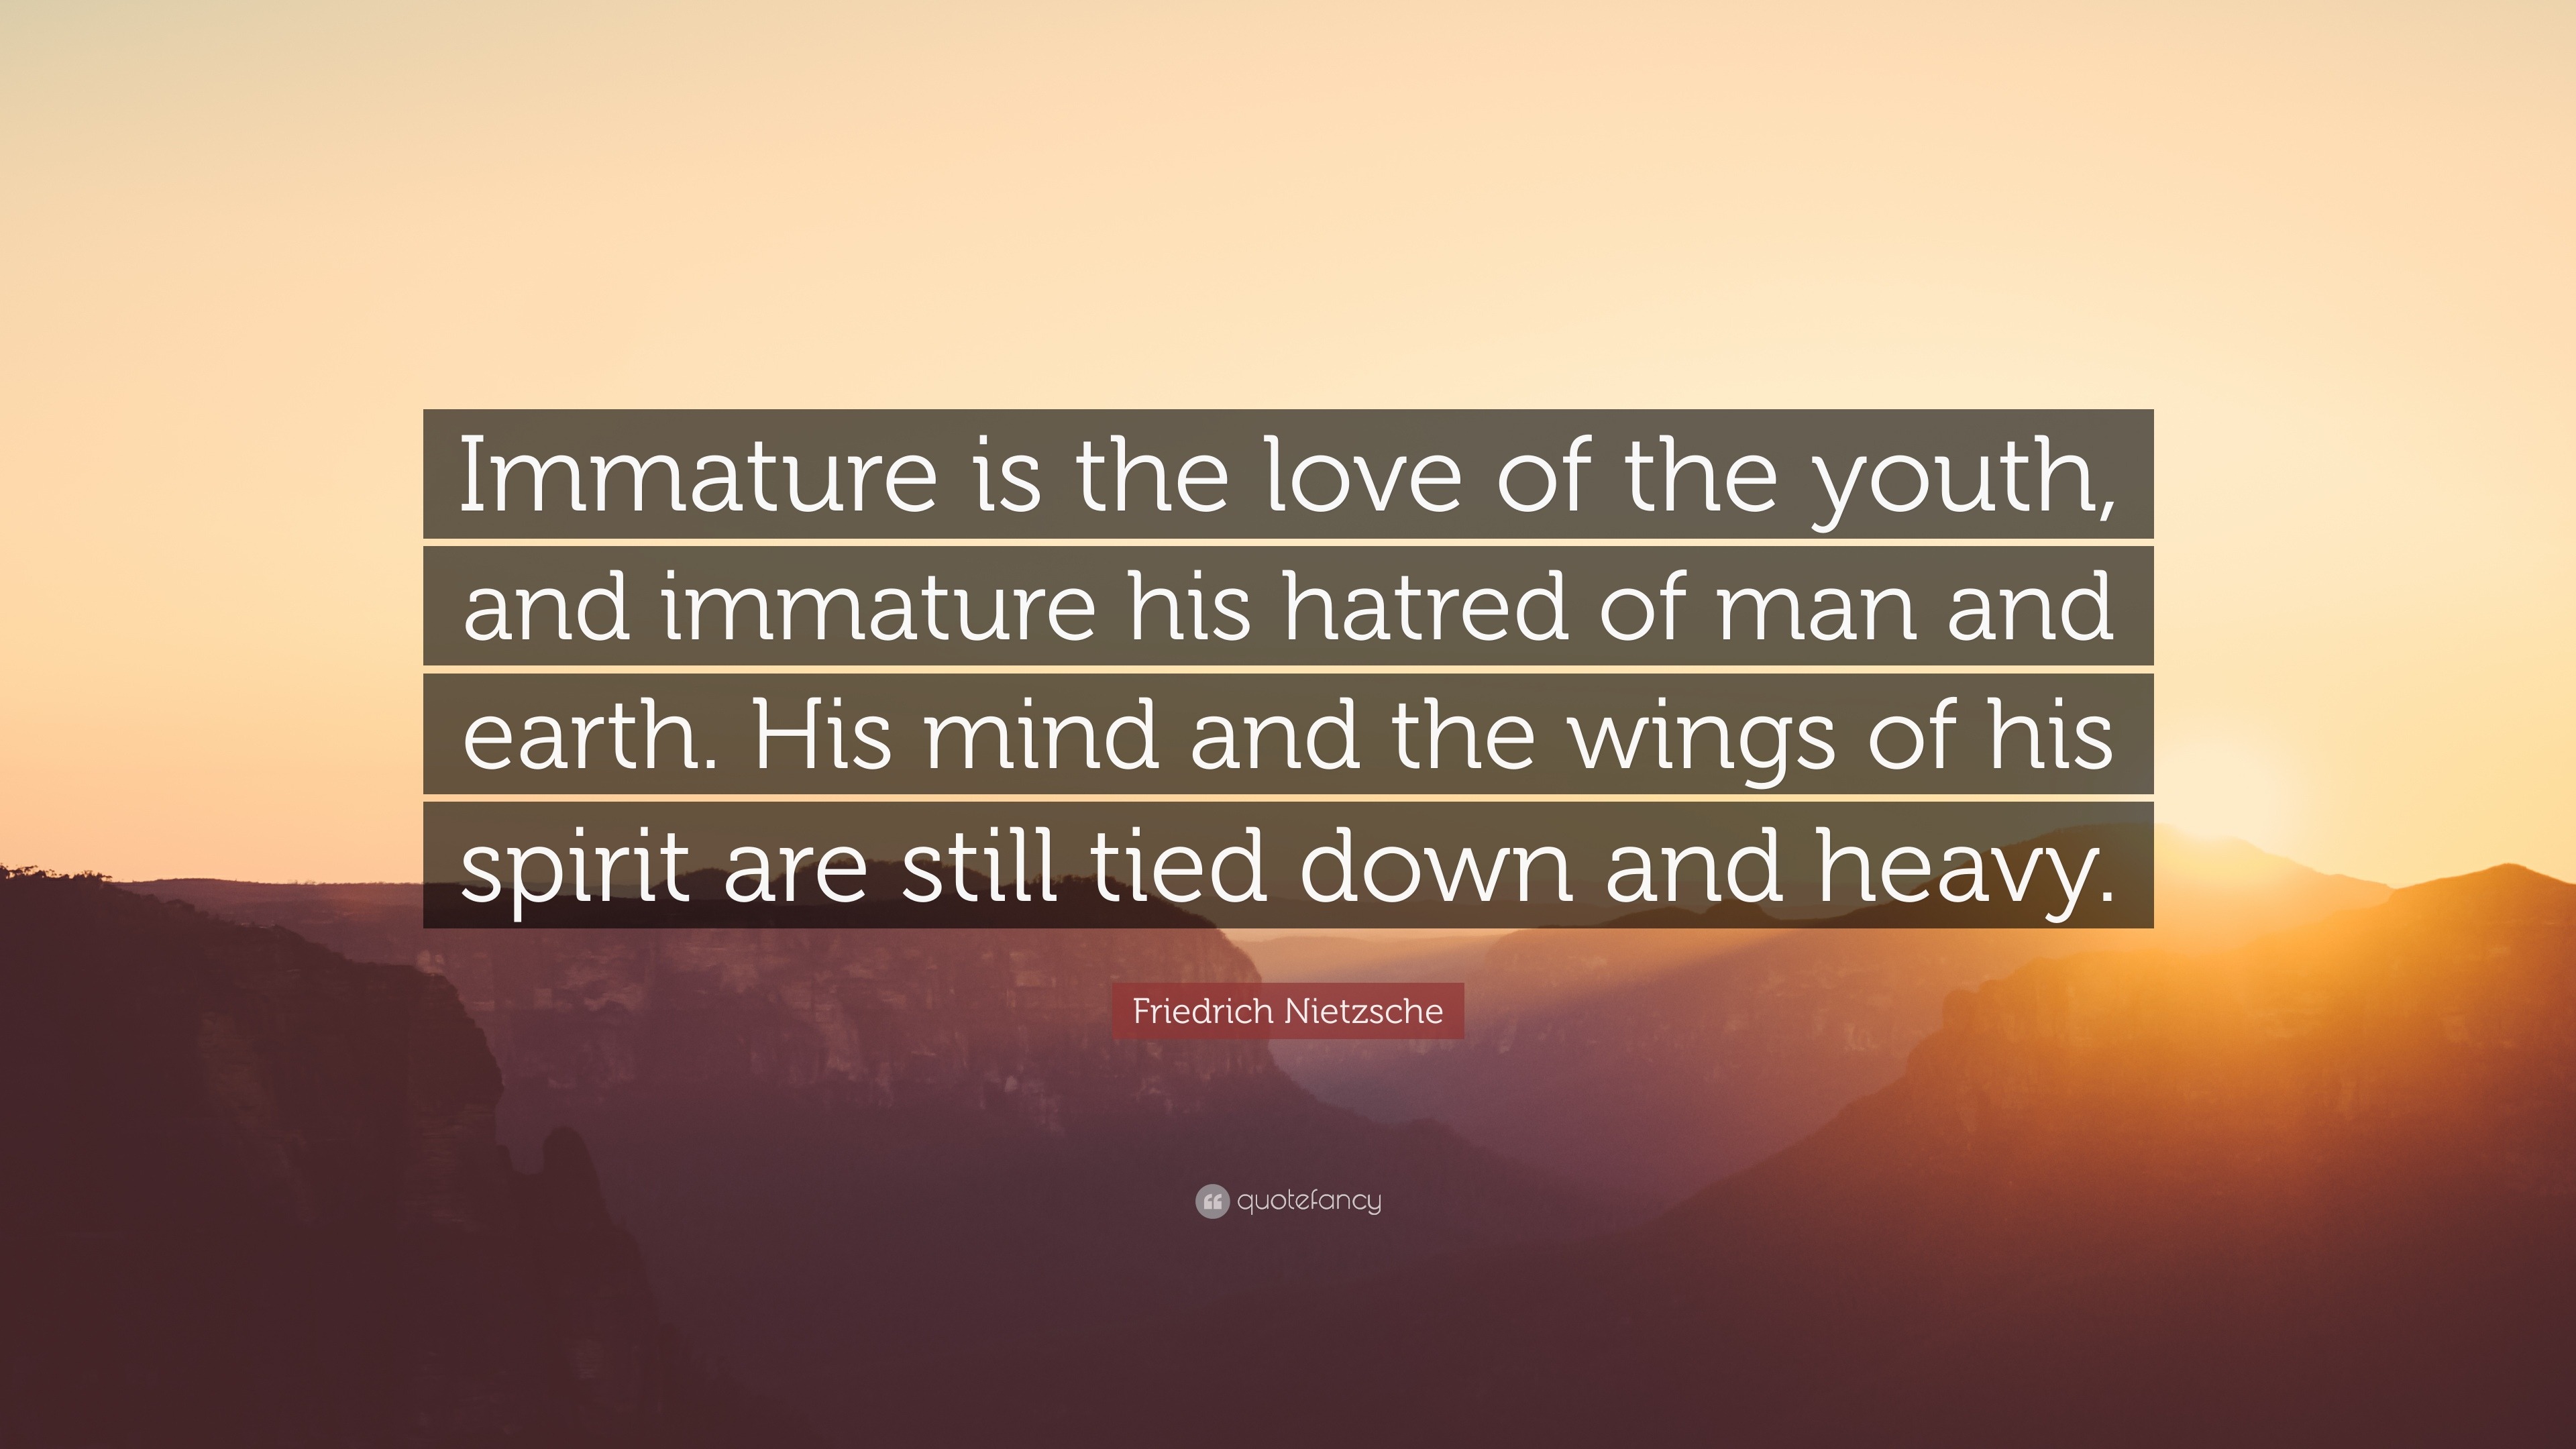 Friedrich Nietzsche Quote Immature Is The Love Of The Youth And Immature His